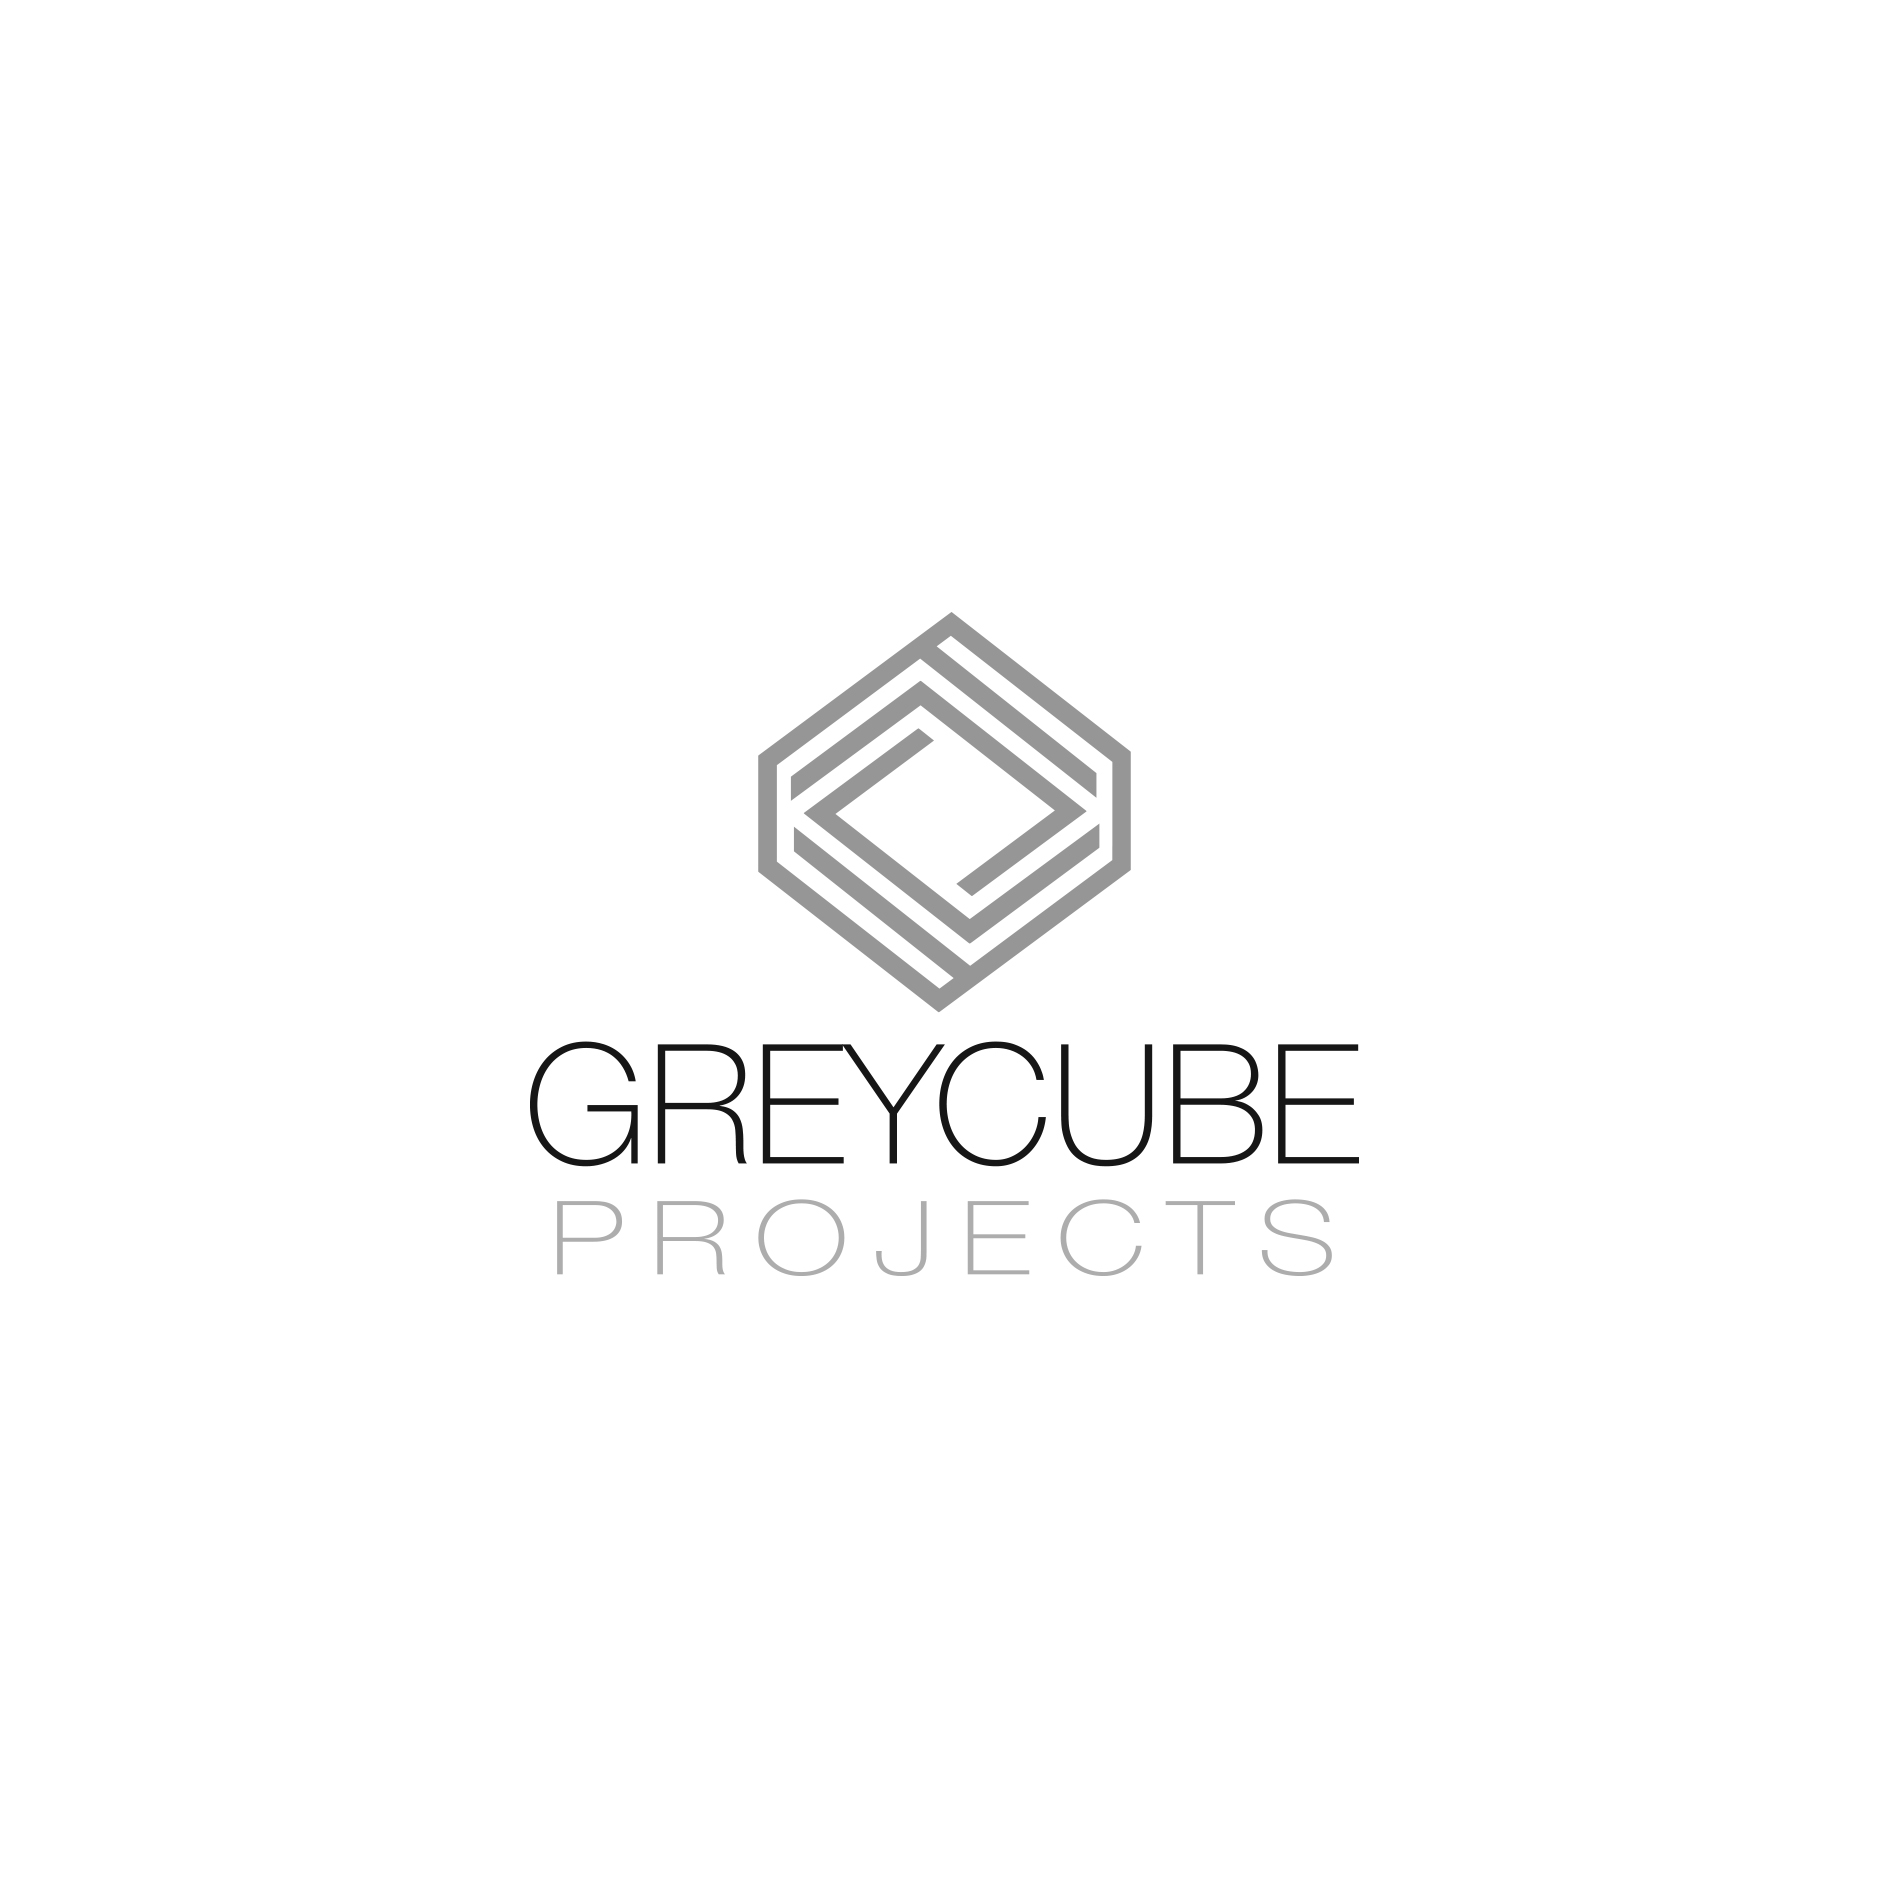 GREY CUBE PROJECTS